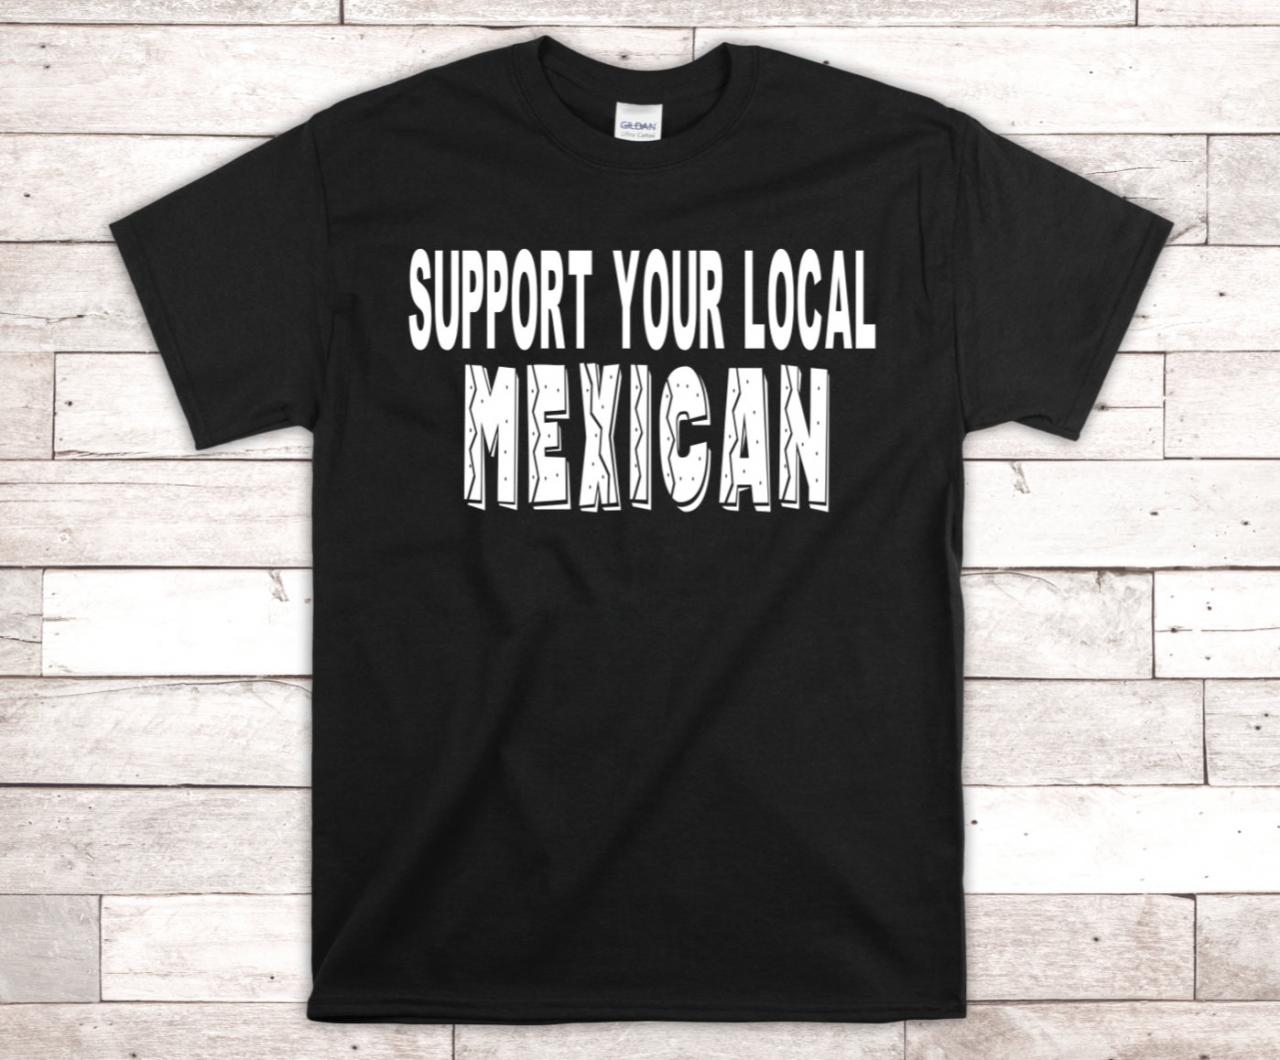 Support Your Local Mexican Shirt, Mexican Shirt, Latino Shirt, Mexican Pride Shirt, Mexico Shirt